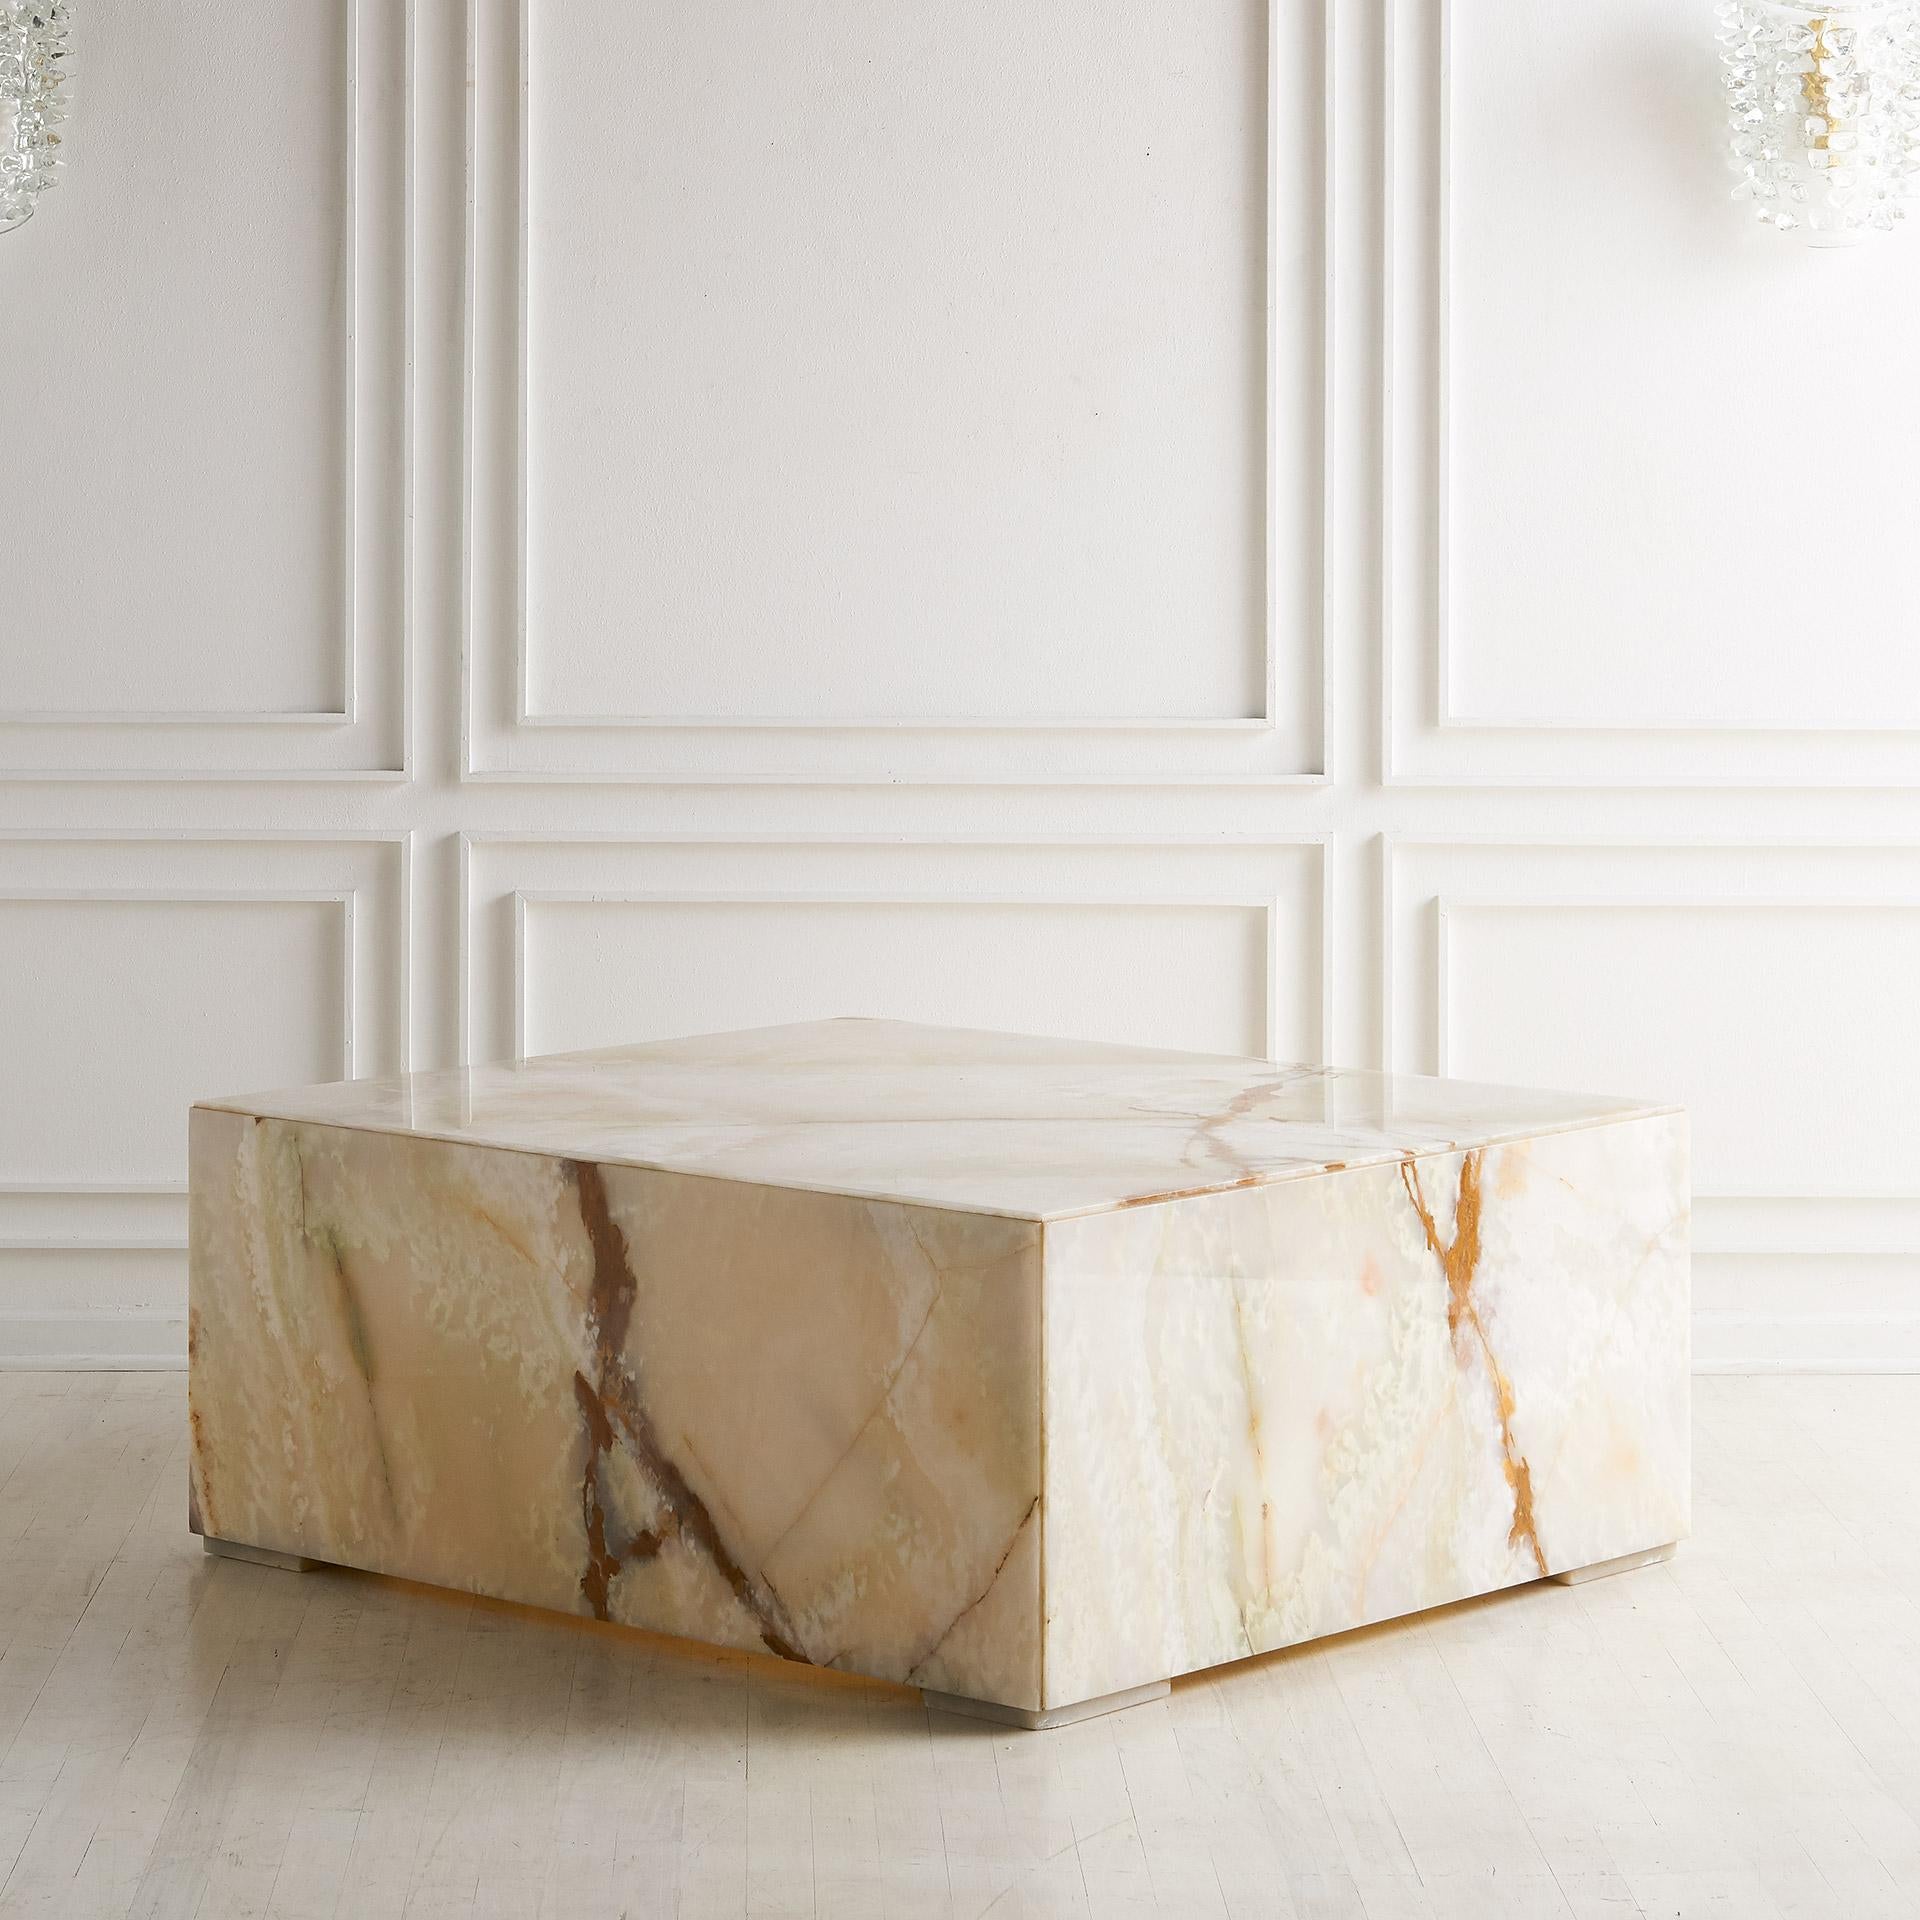 A stunning and large scale custom made Italian onyx coffee table. Origination from the collection of African American publishing pioneers, John and Eunice Johnson, who published the magazines Ebony and Jet. This table was custom made for the common